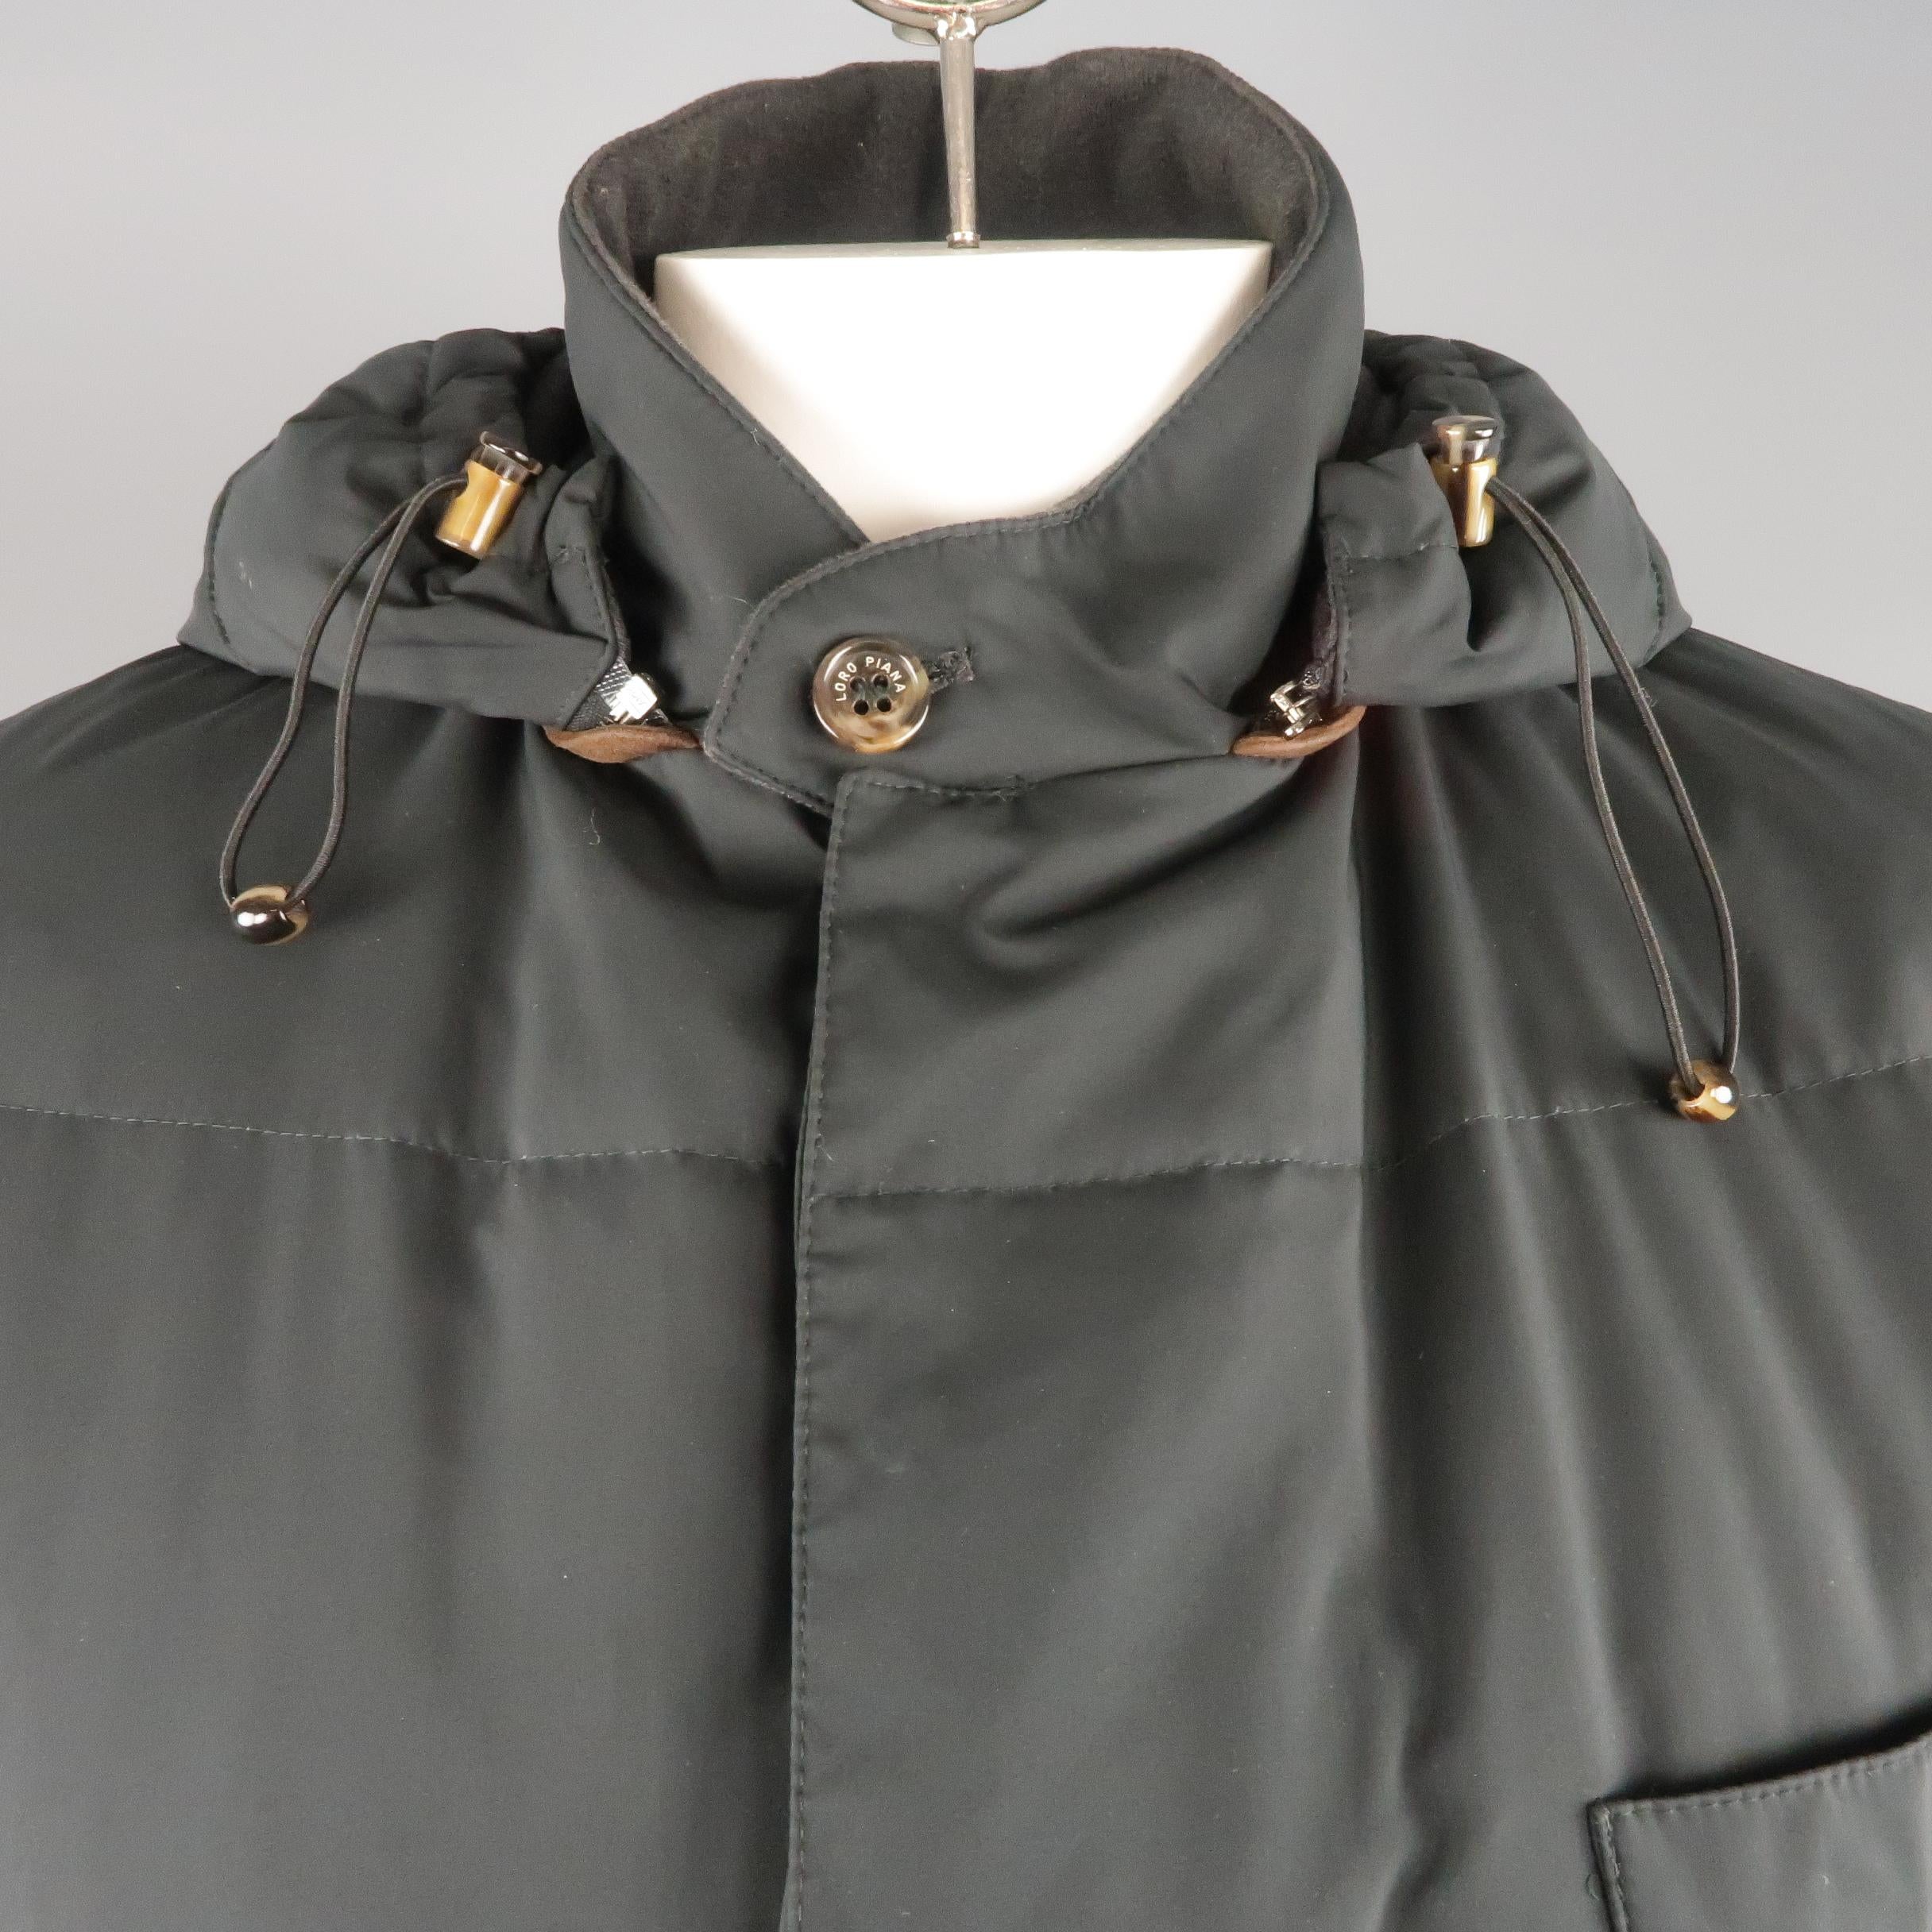 LORO PIANA winter jacket comes in navy quilted down filled fabric with a high tab collar, zip closure with snap placket, patch flap pockets, and detachable hood. Made in Italy.
 
Excellent Pre-Owned Condition. Retails: $2,595.00.
Marked: L
